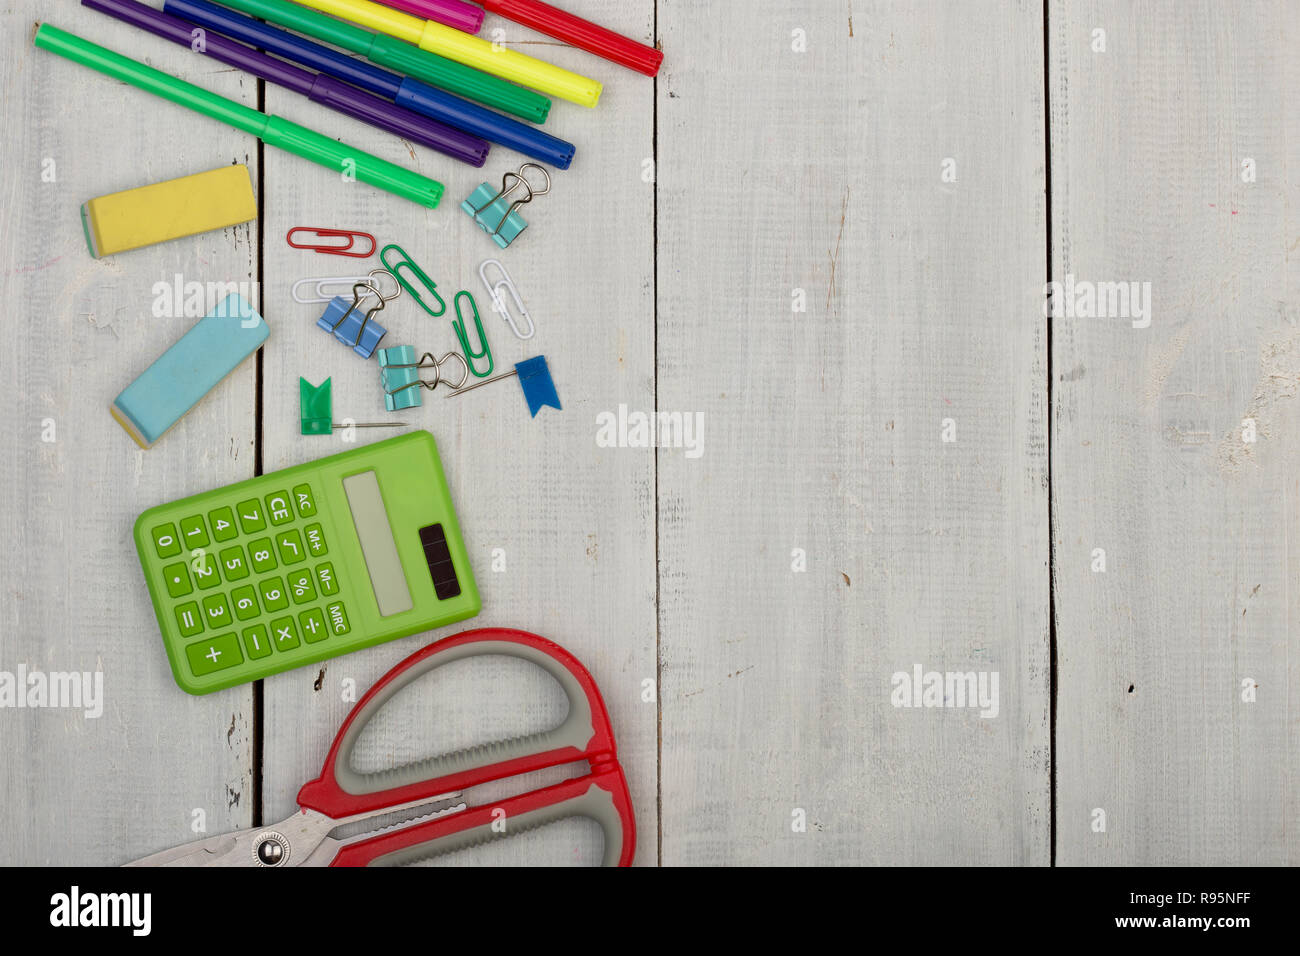 School supplies - scissors, stickers, calculator, eraser, markers and other accessories on white wooden table Stock Photo